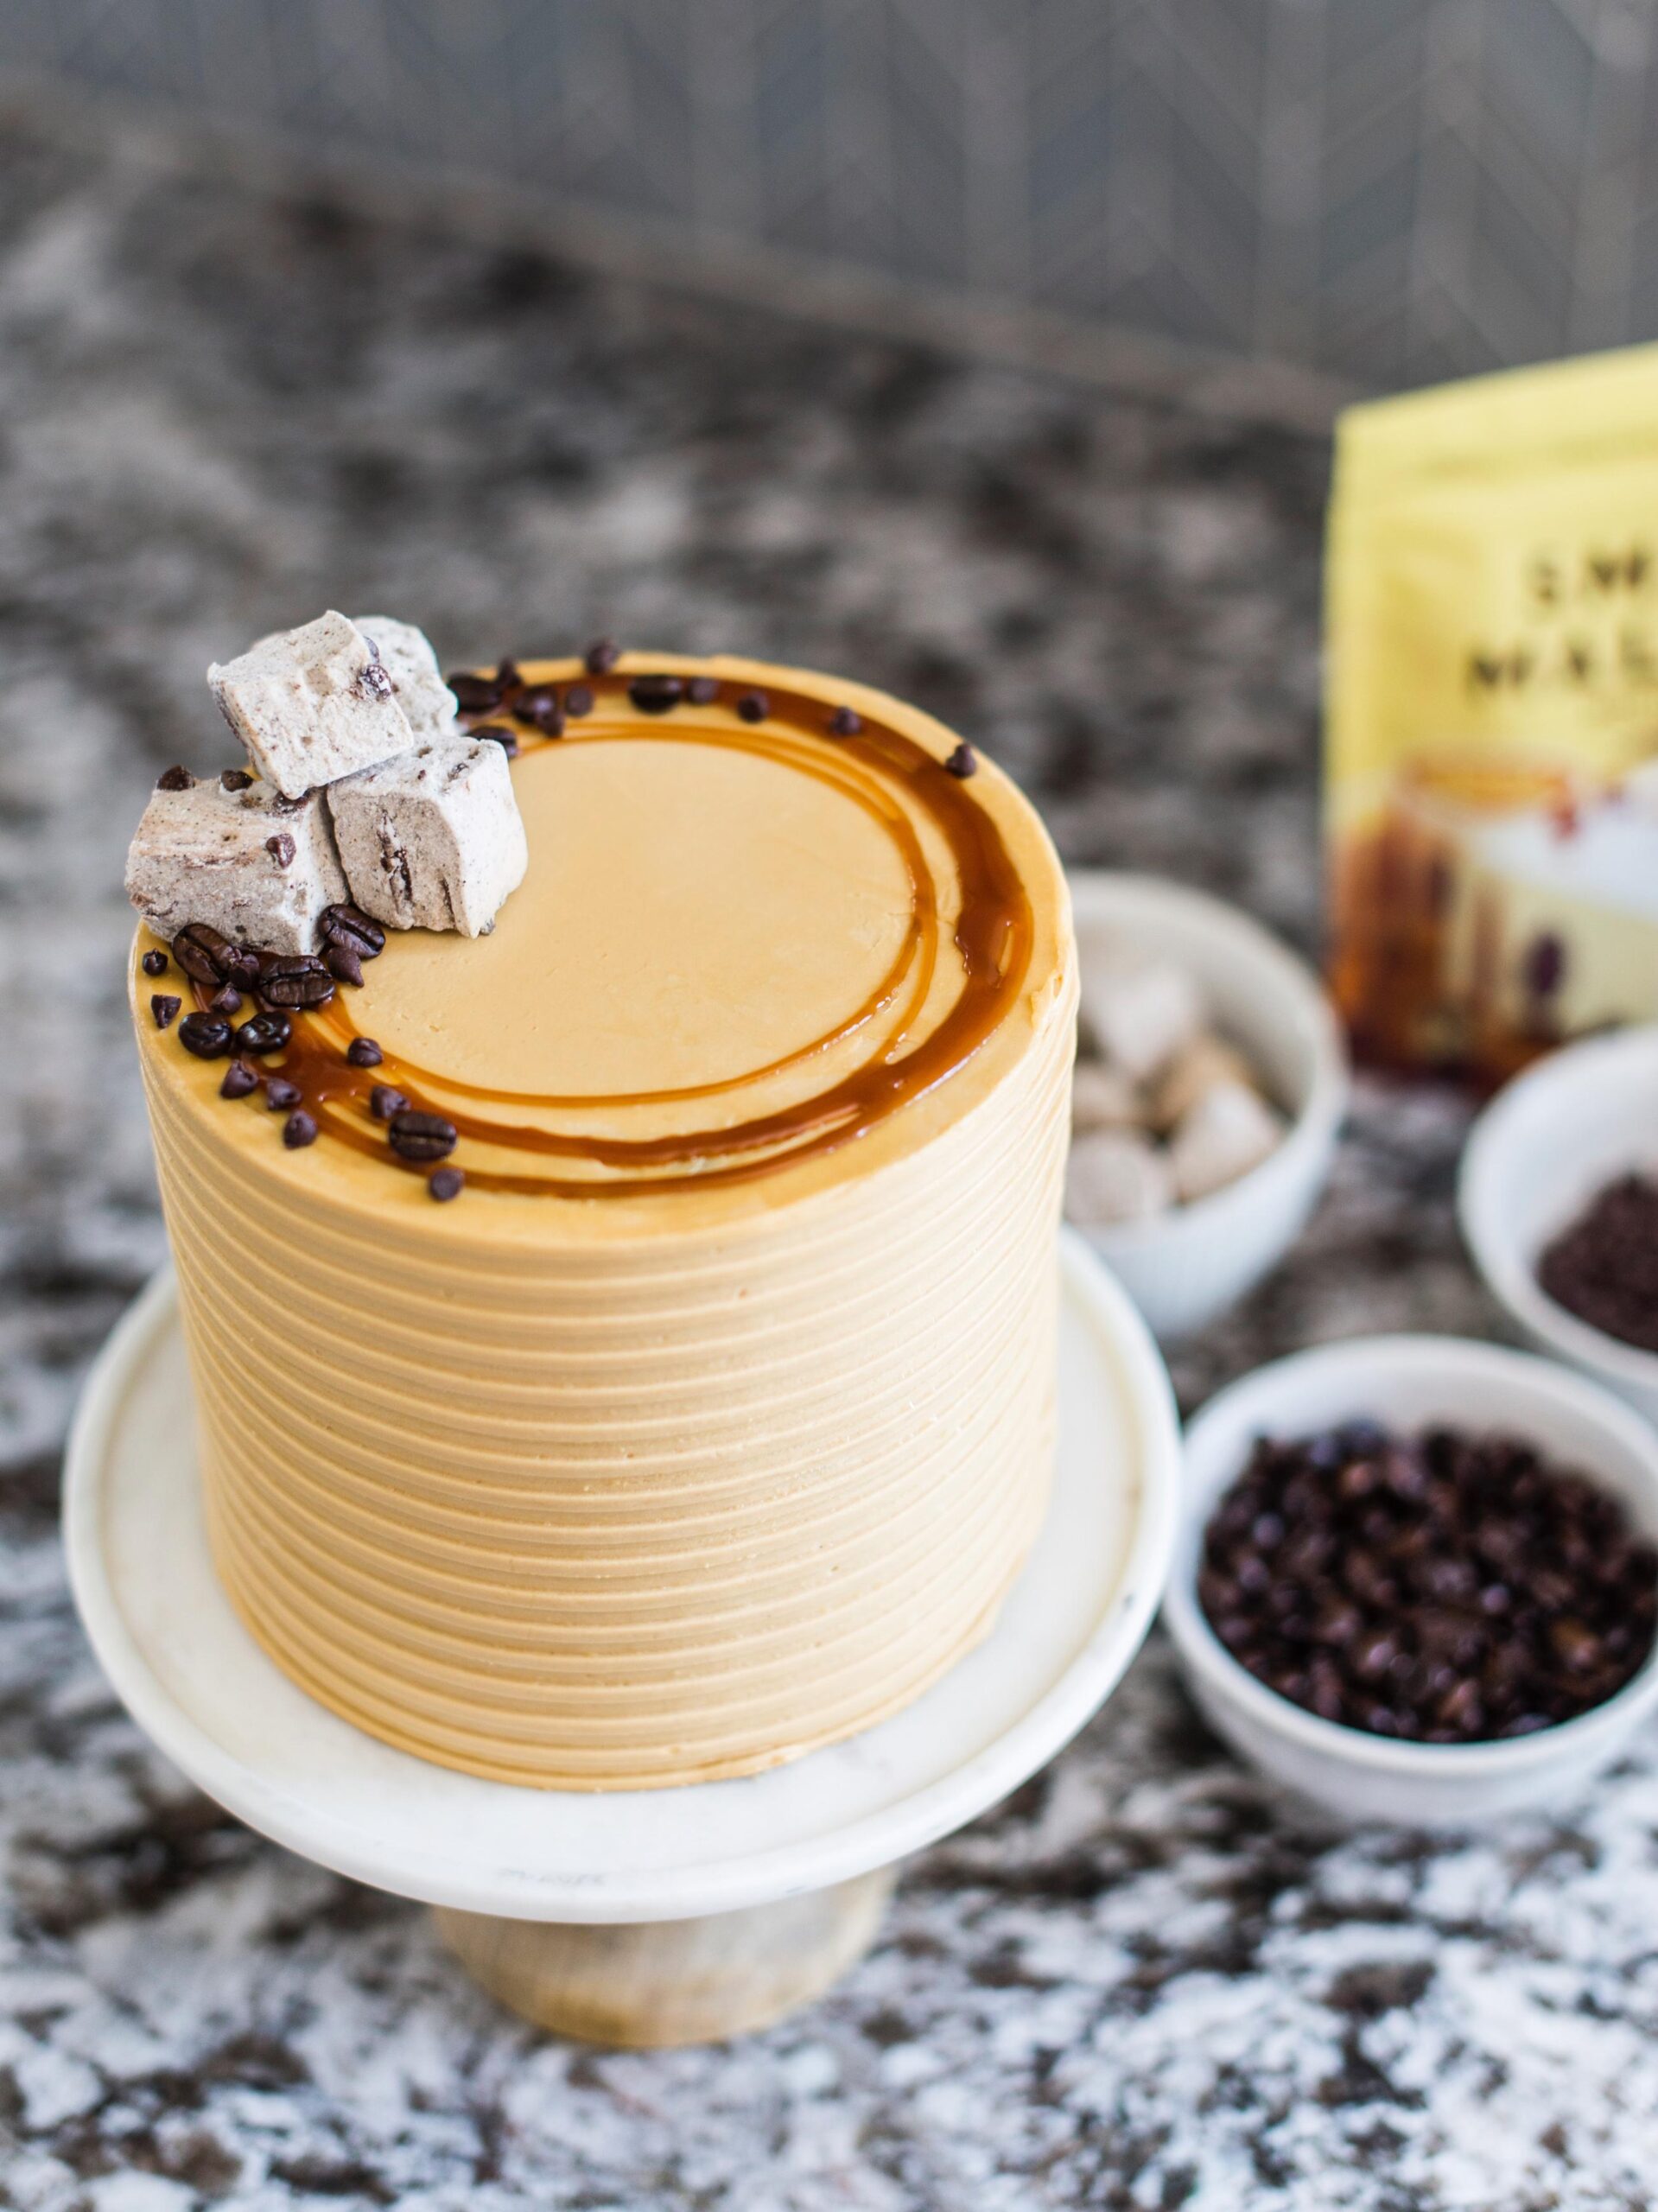  Satisfy your sweet tooth with this indulgent mocha latte chip cake.